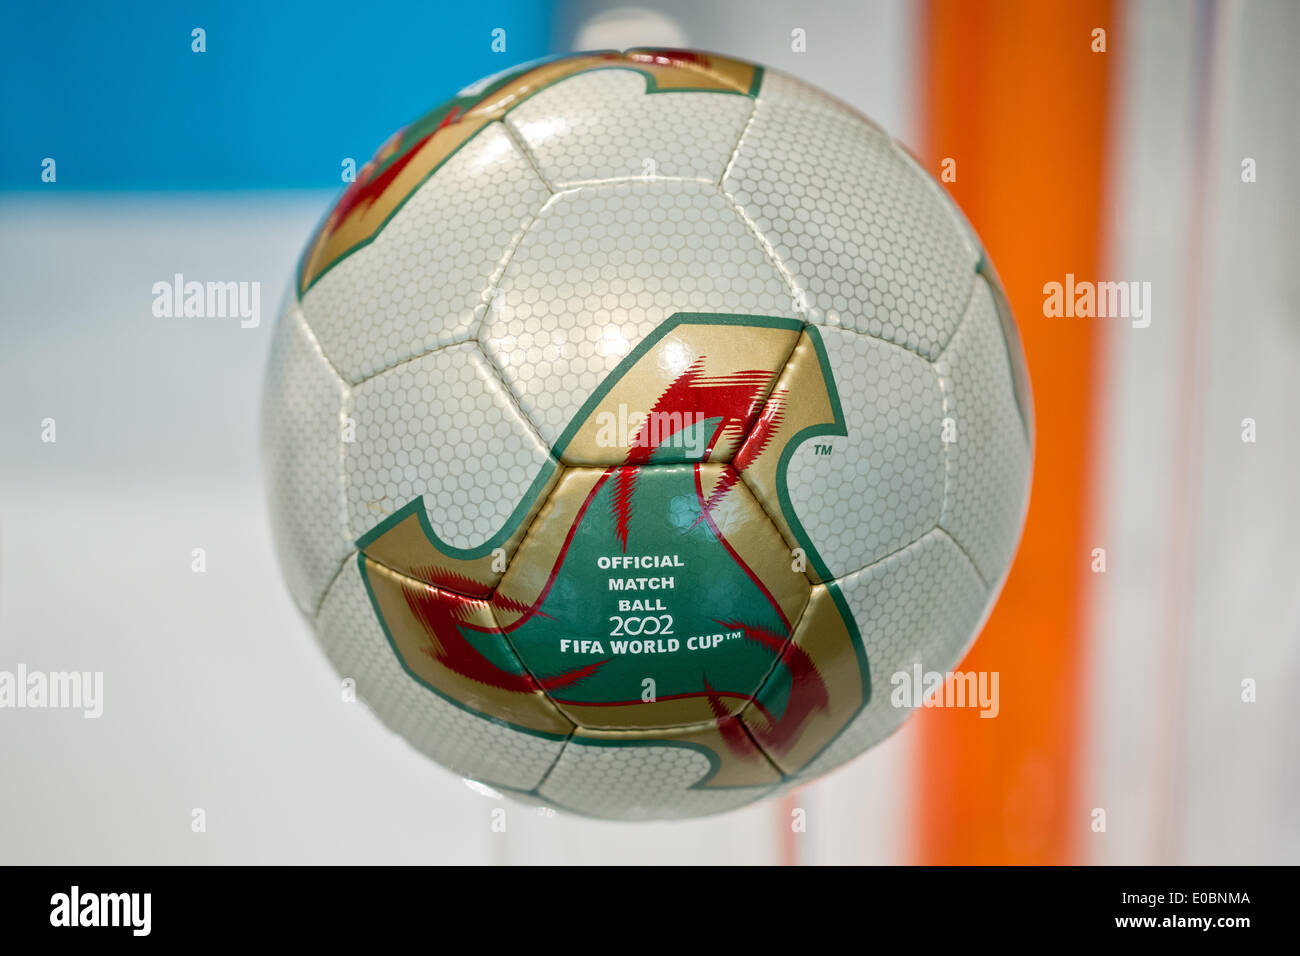 Fuerth, Germany. 08th May, 2014. The 'Fevernova' soccer ball which was the South Korea ball of the 2002 soccer world cup in France is pictured during the general meeting of sporting goods manufacturer adidas in Fuerth, Germany, 08 May 2014. © dpa/Alamy Live News Stock Photo